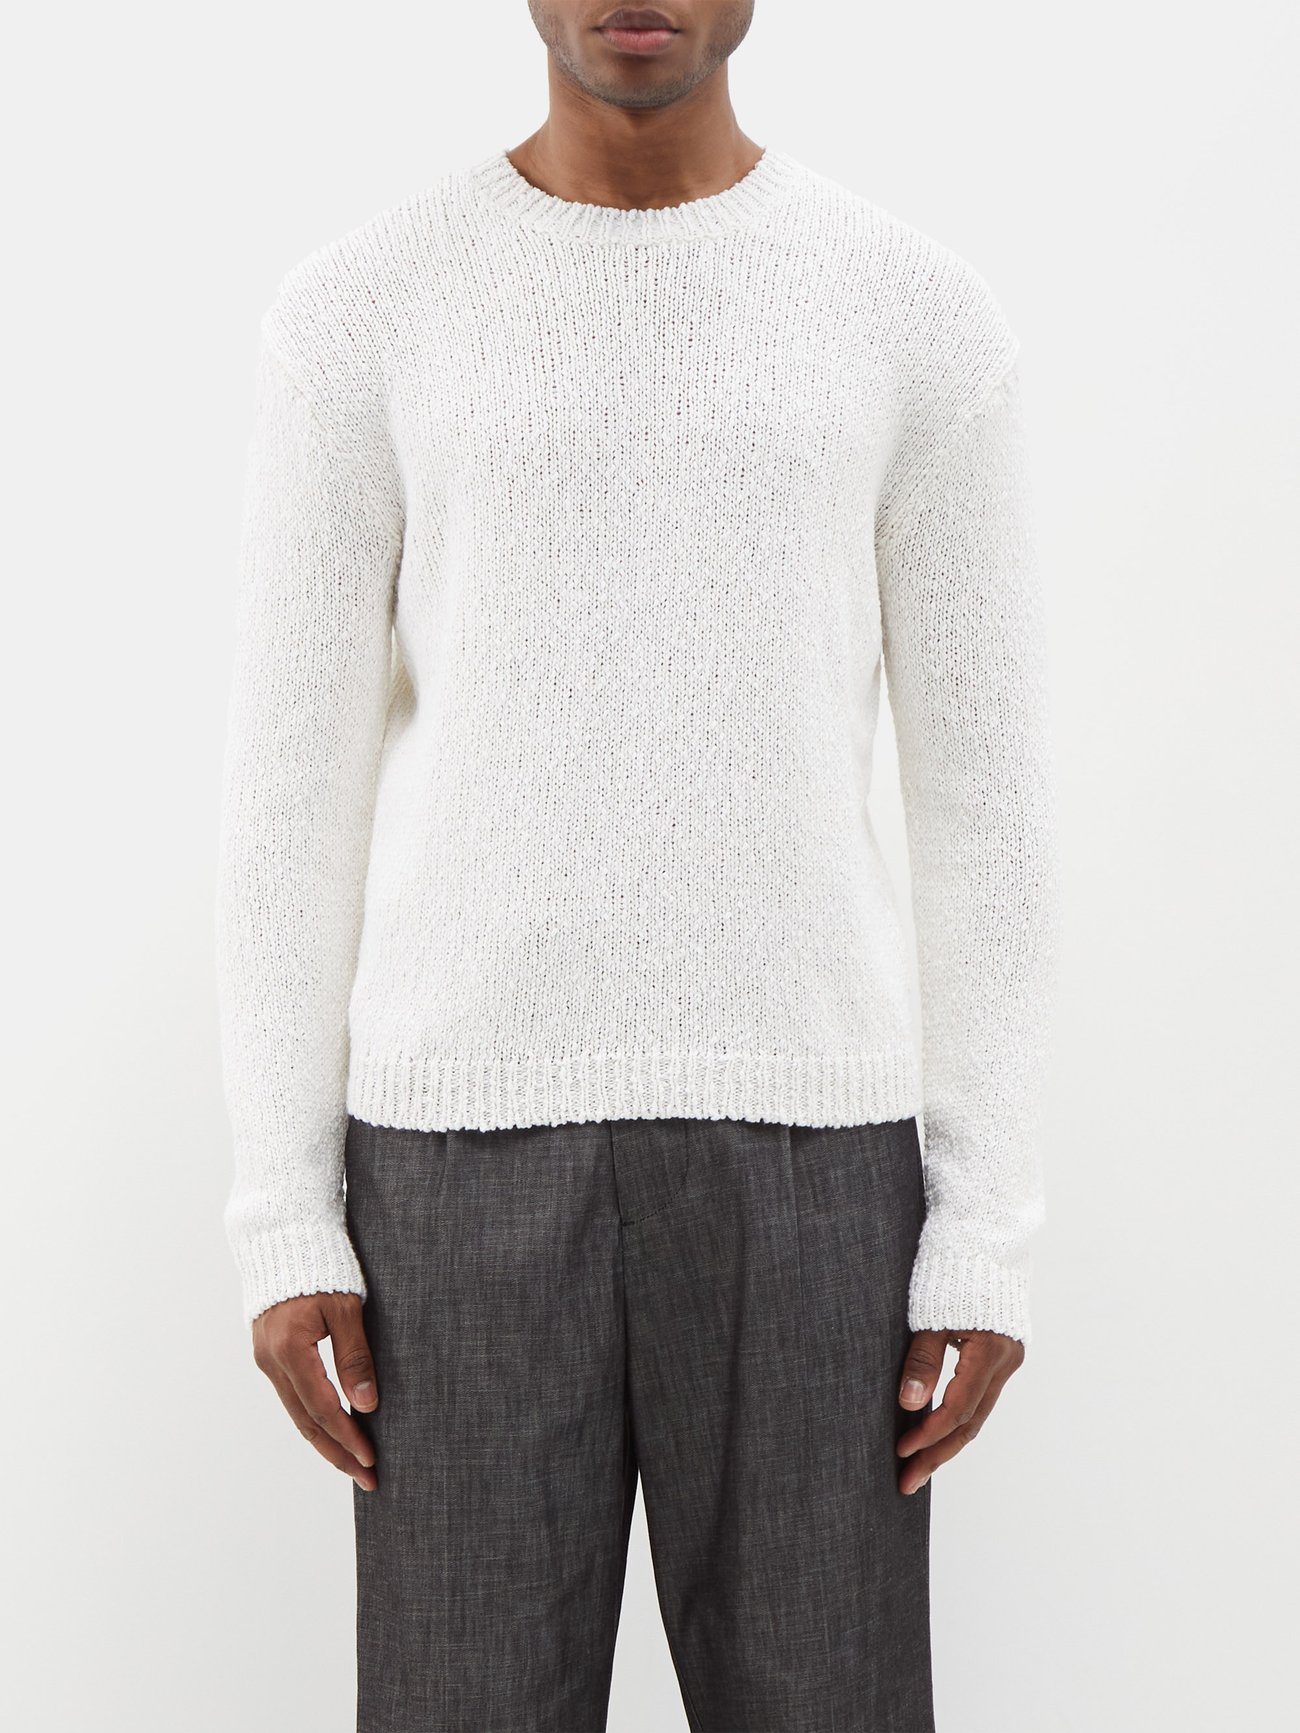 Pacific Fare Ham selv White Gaston knitted cotton-blend sweater | A.P.C. | MATCHESFASHION US